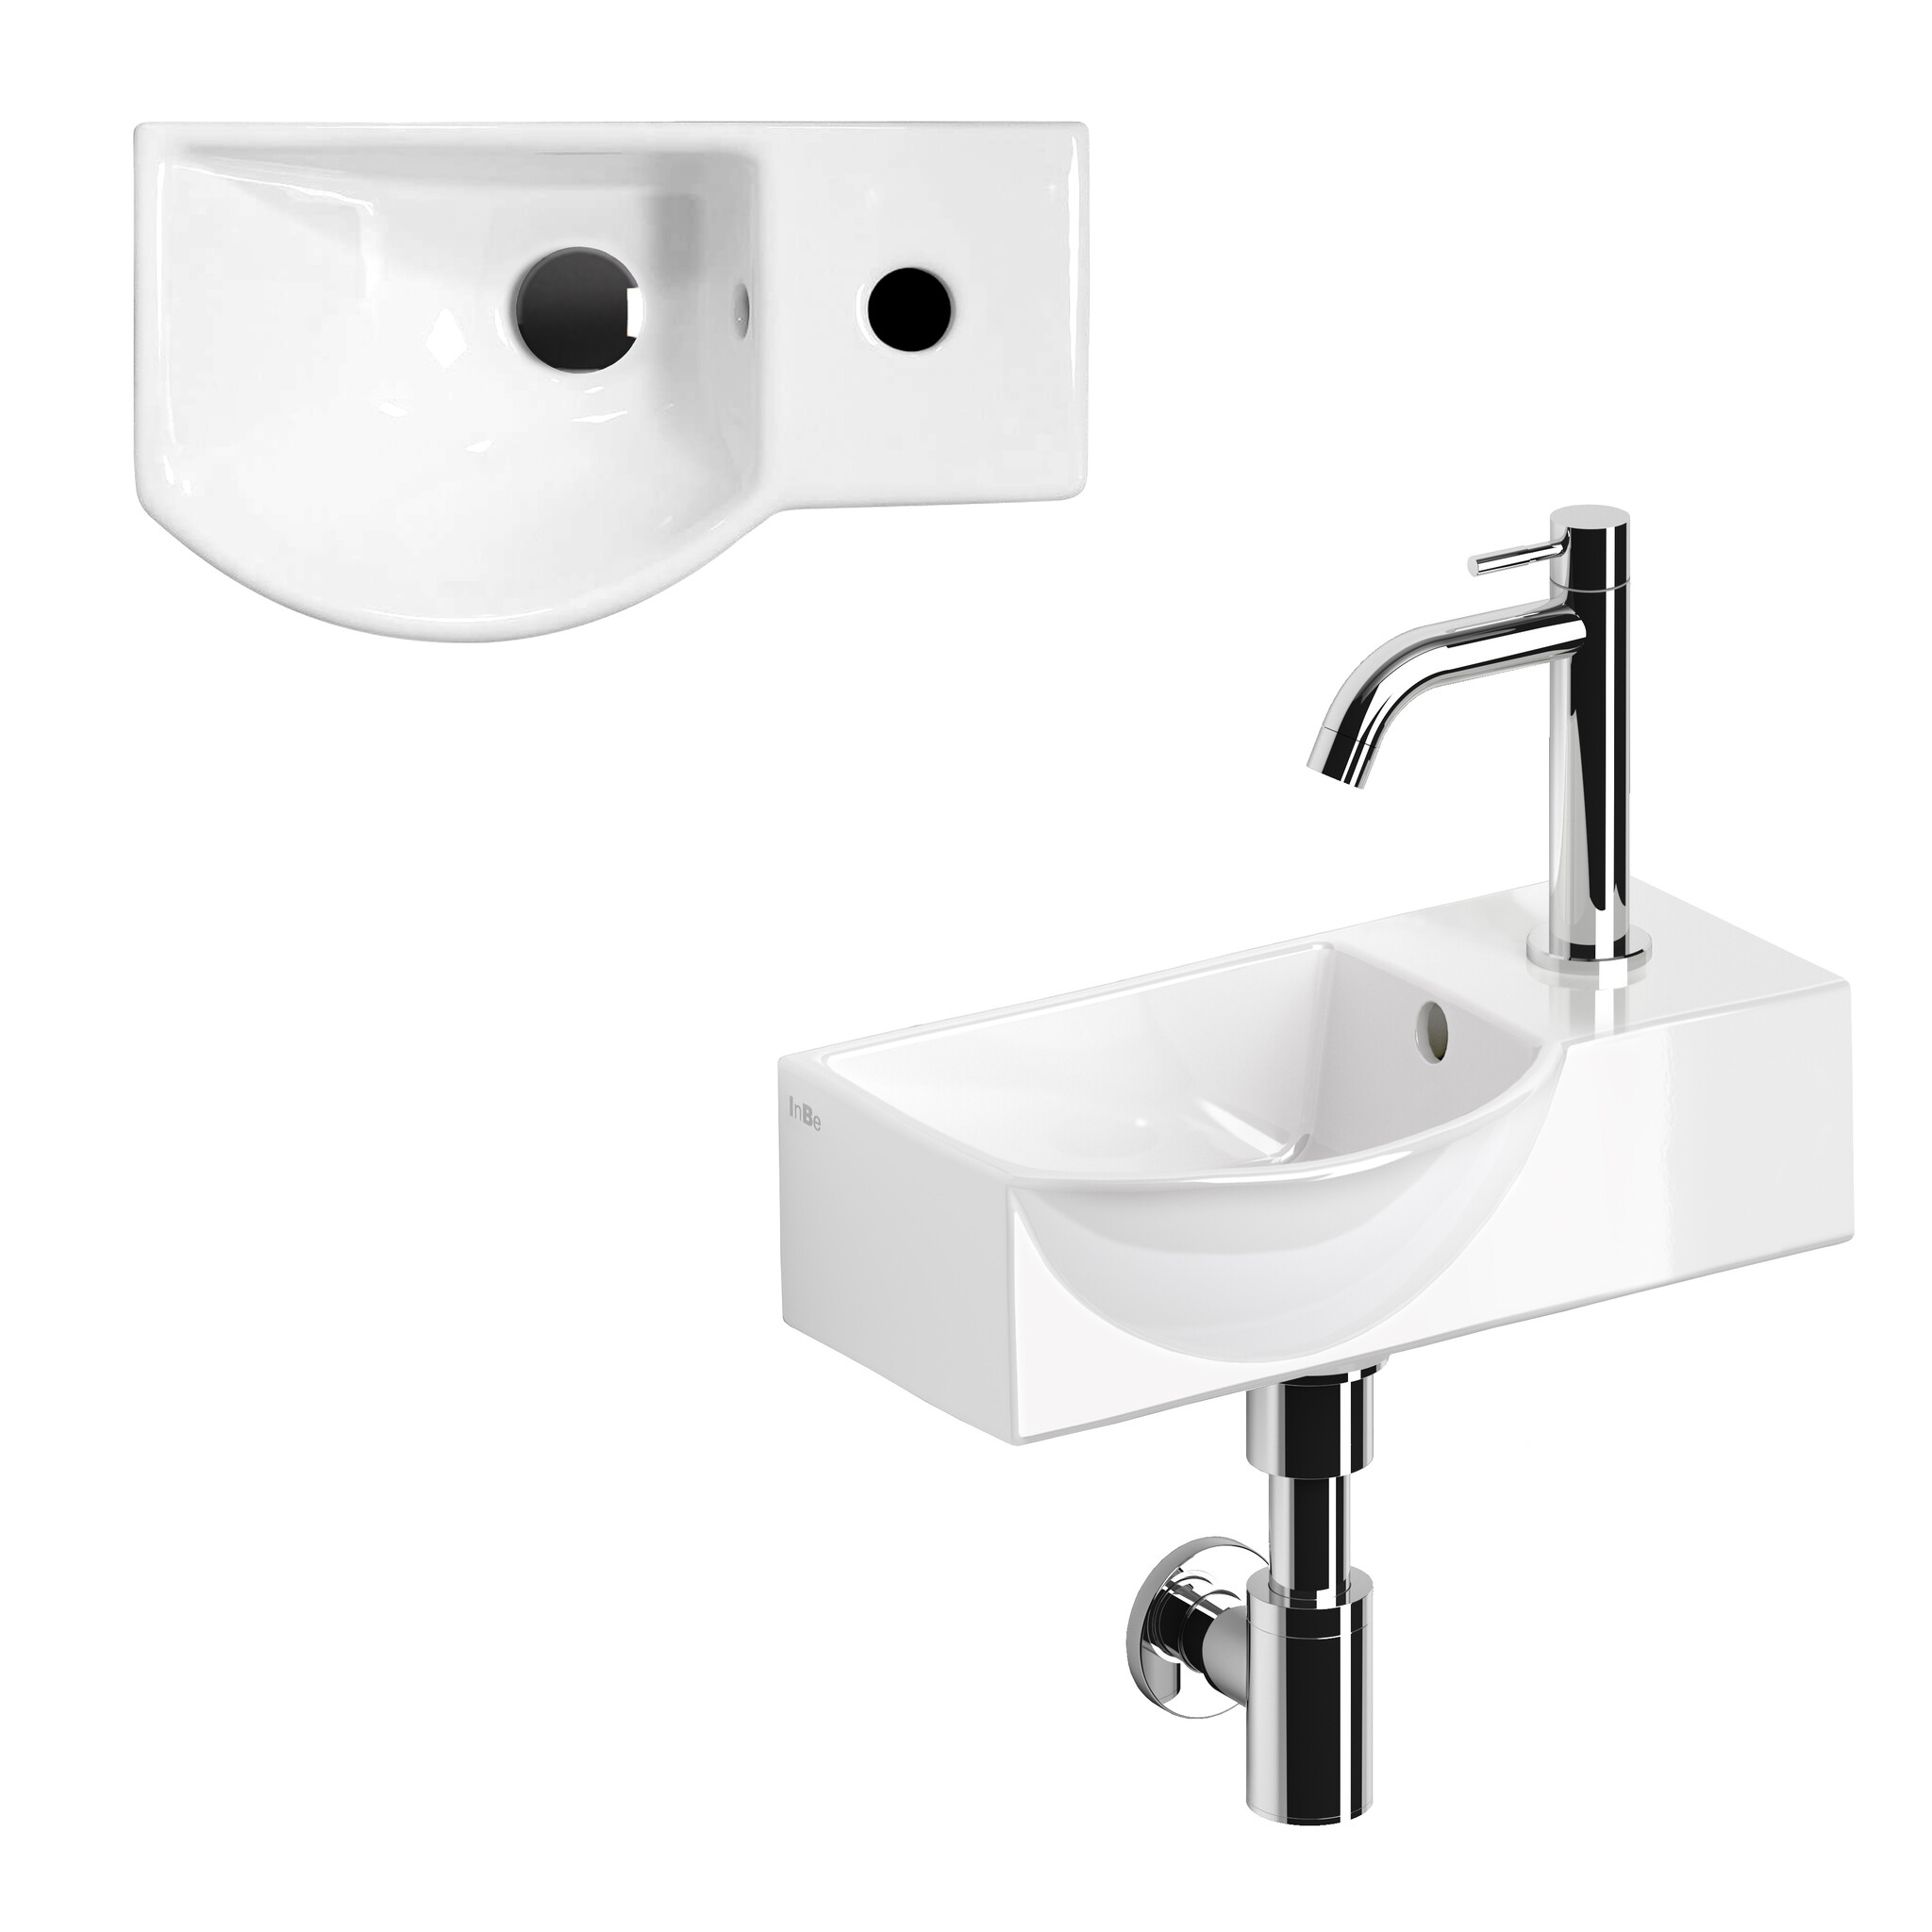 InBe InBe hand basin set 6, with hand basin, tap, drain and trap, white ceramics and chrome